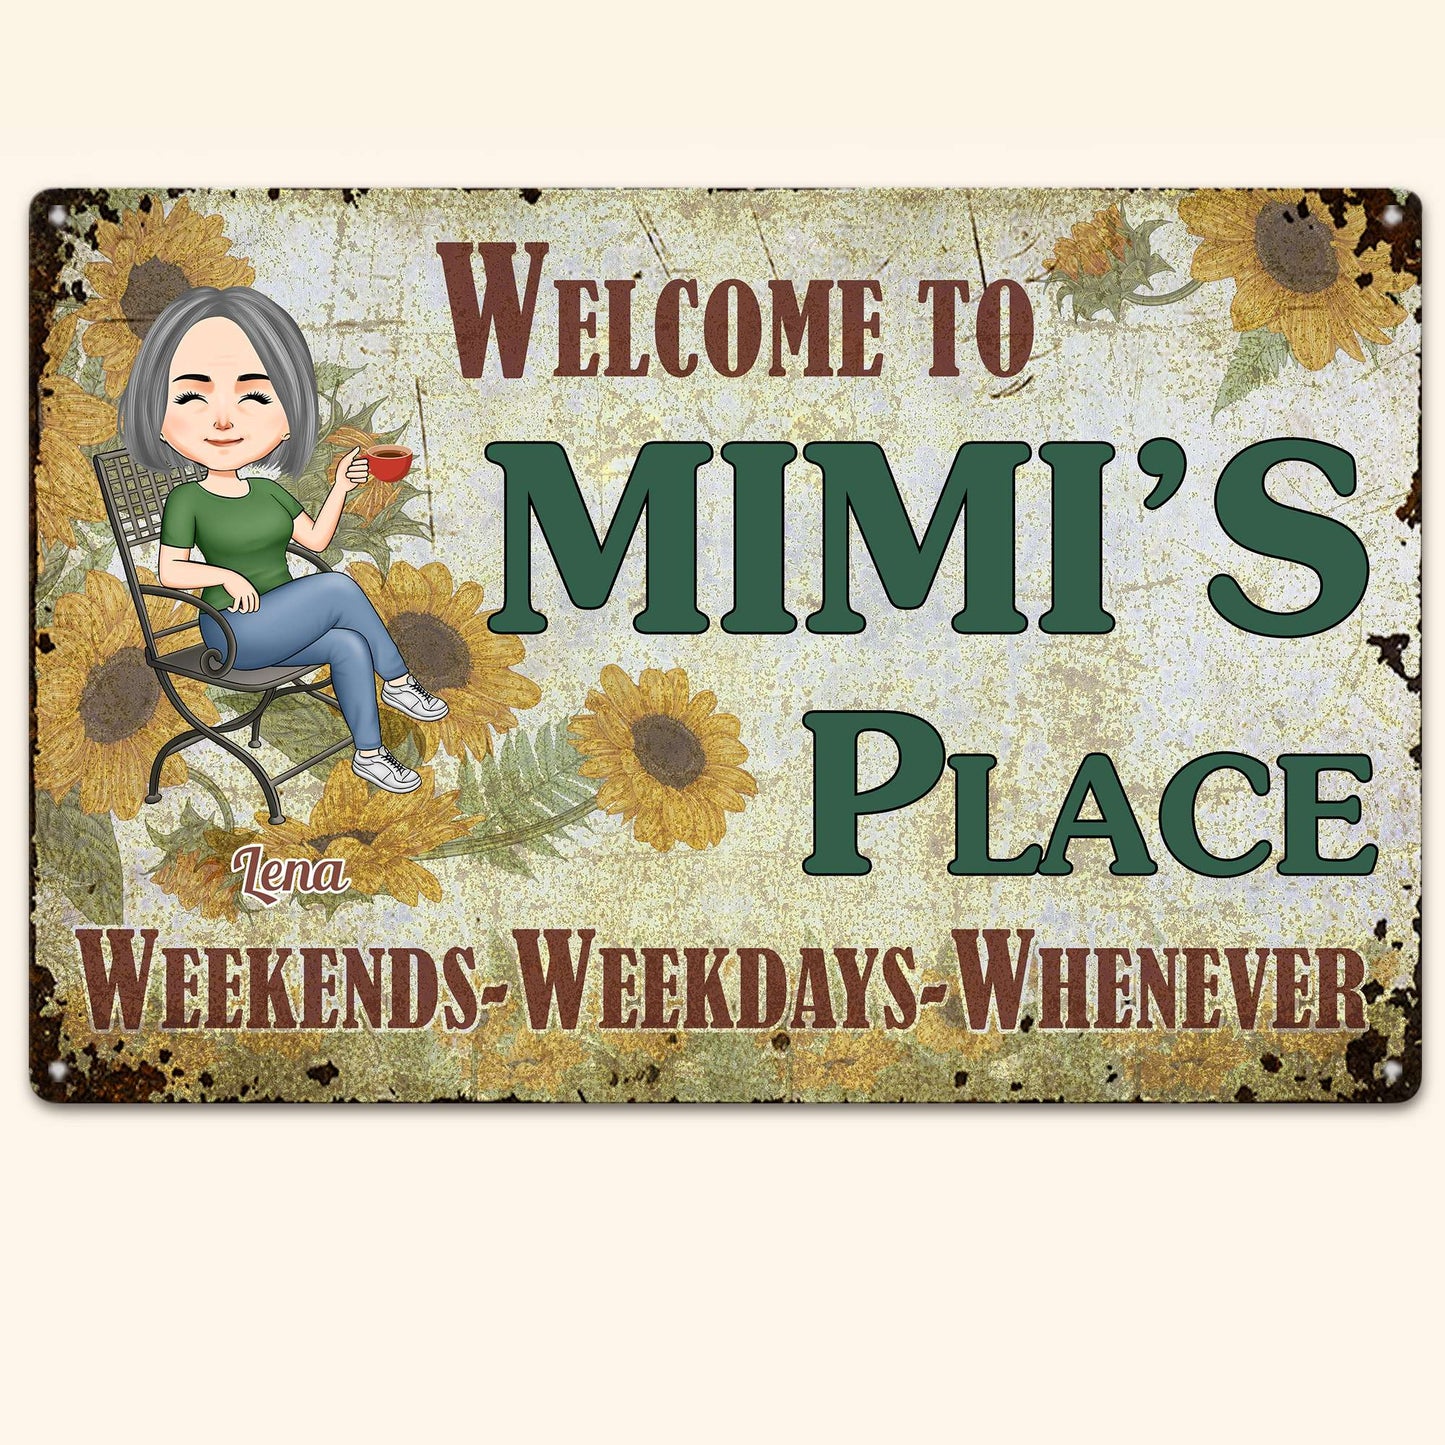 Welcome To Mimi's, Grandma Place - Personalized Metal Sign